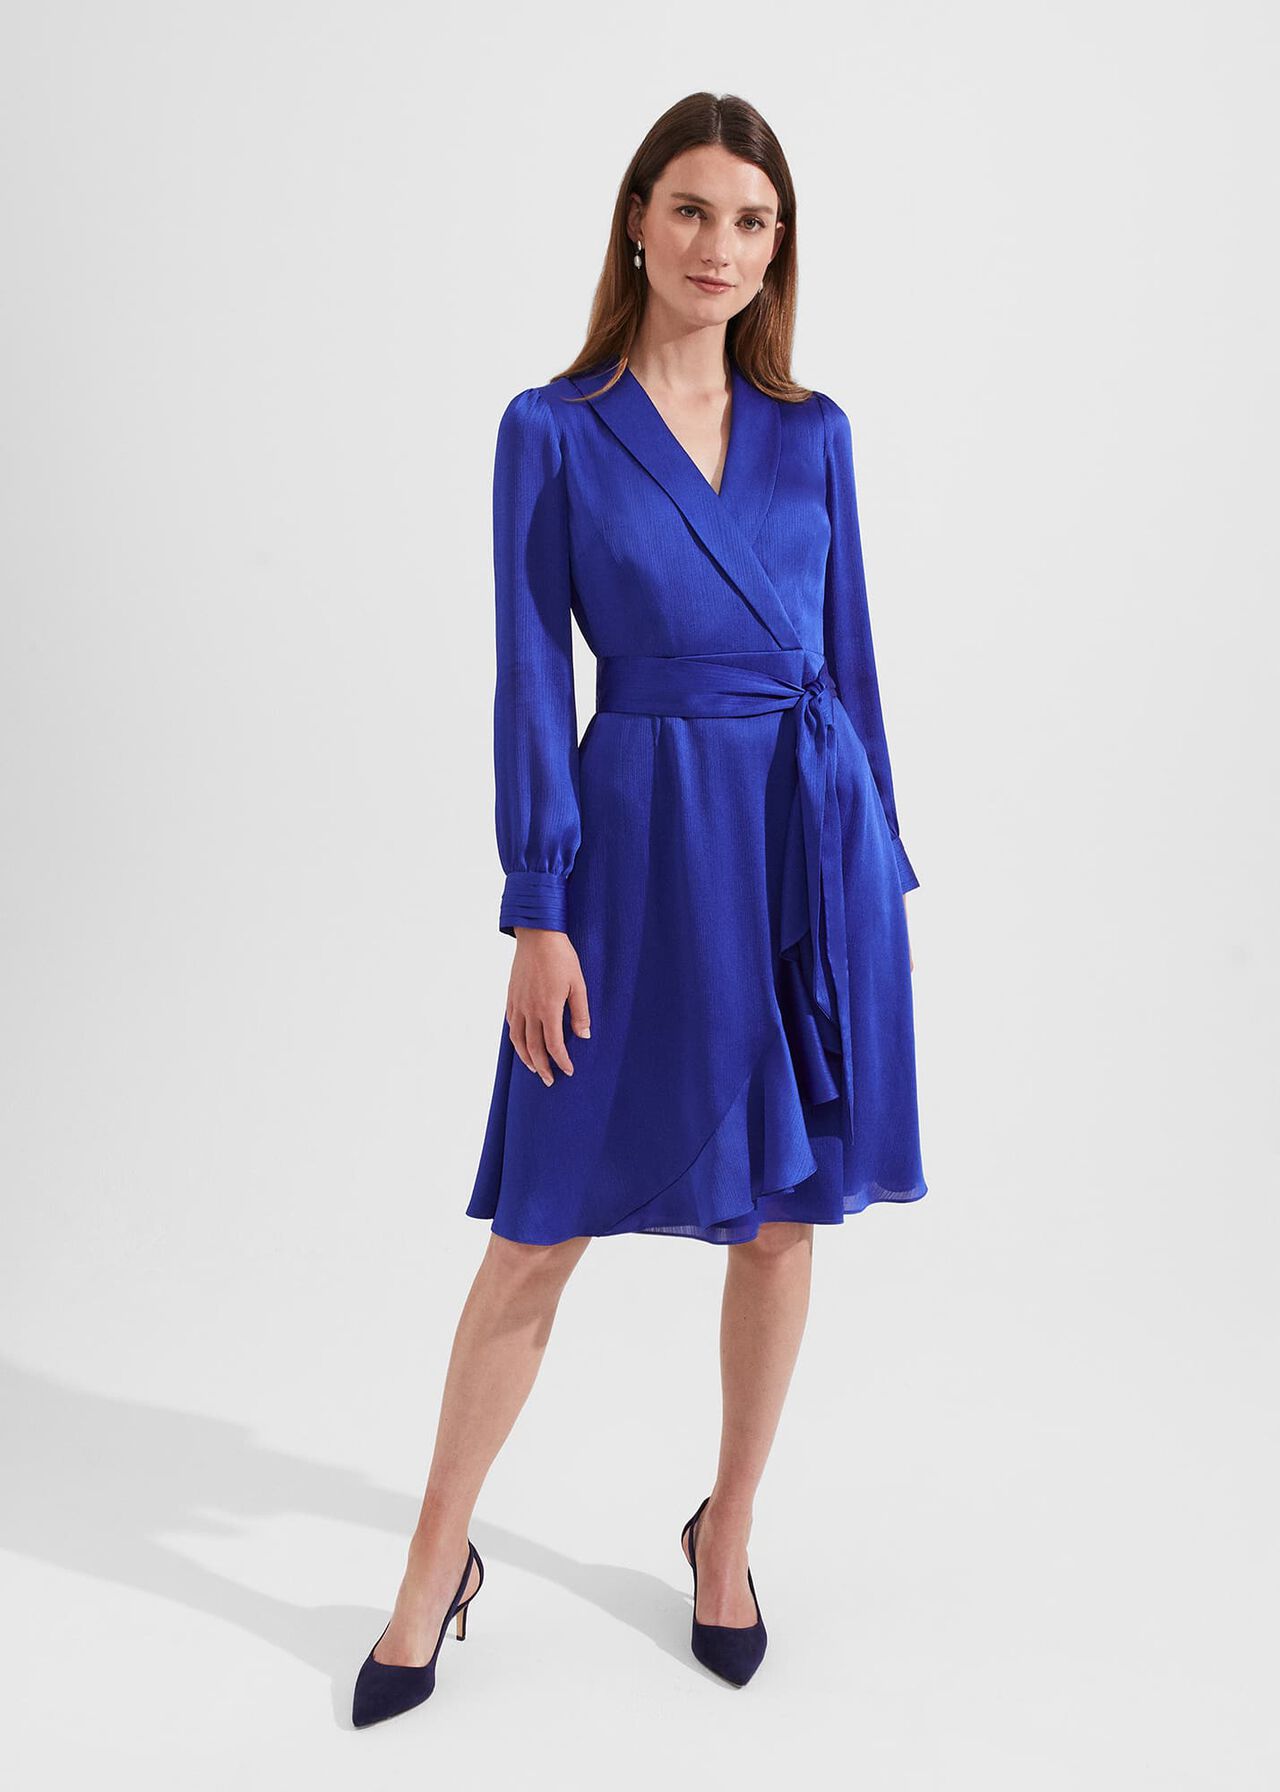 Sally Satin Fit And Flare Dress, Egyptian Blue, hi-res